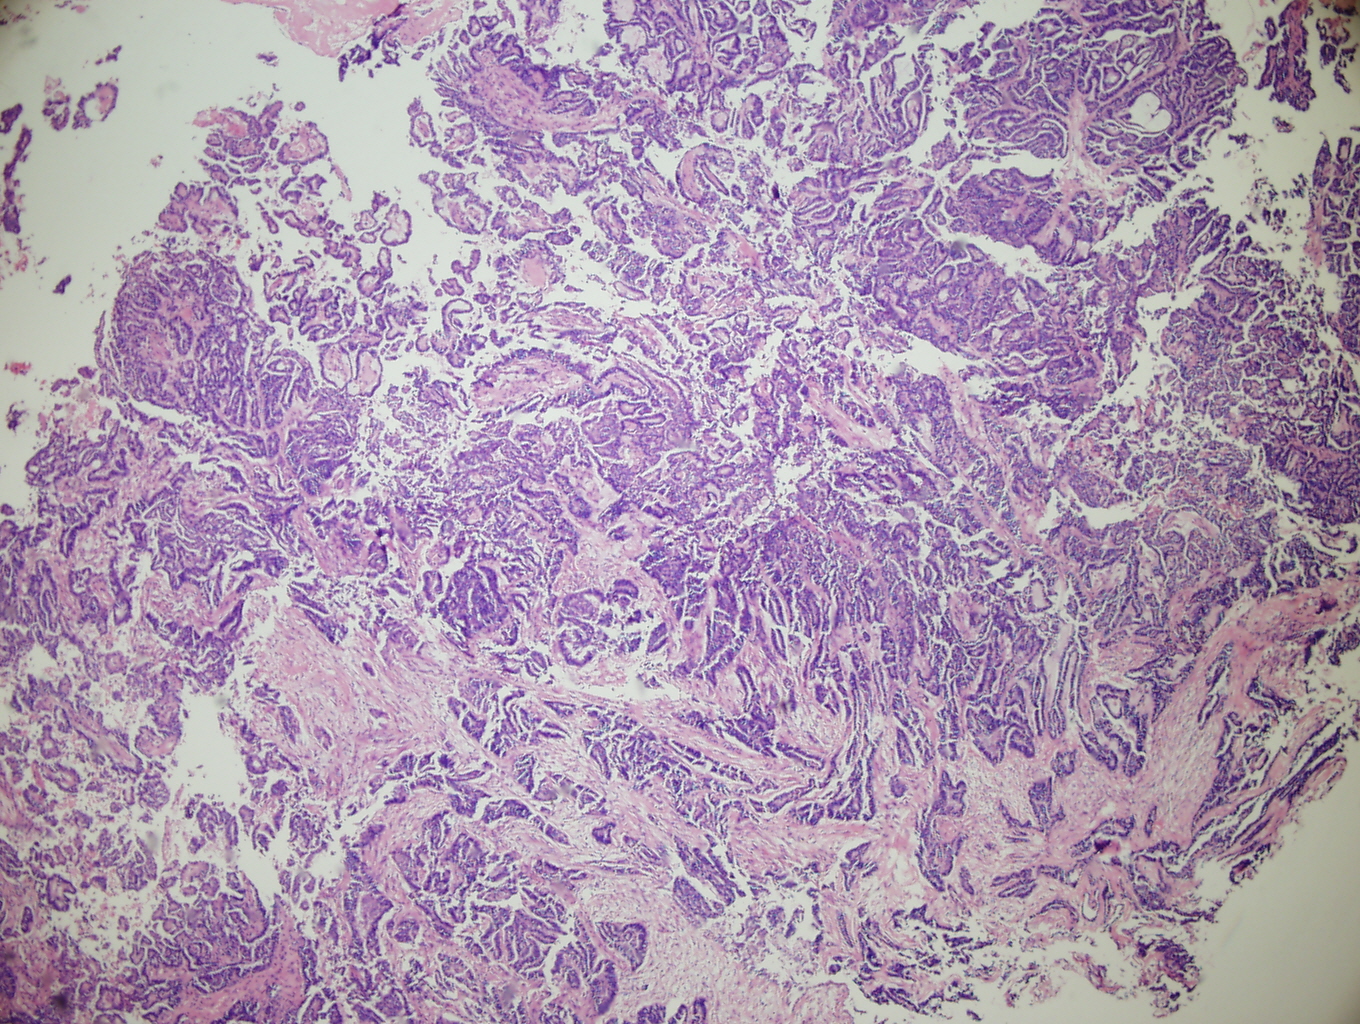 Figure 1: Low power (4X) view of section of tumor from the lower uterine segment. The tumor displays the ductal pattern of mesonephric adenocarcinoma with intraglandular villous papillae. Note the similarity of this appearance to the villoglandular variant of endometroid endometrial adenocarcinoma. secreting cells and containing papillary intracystic projections.